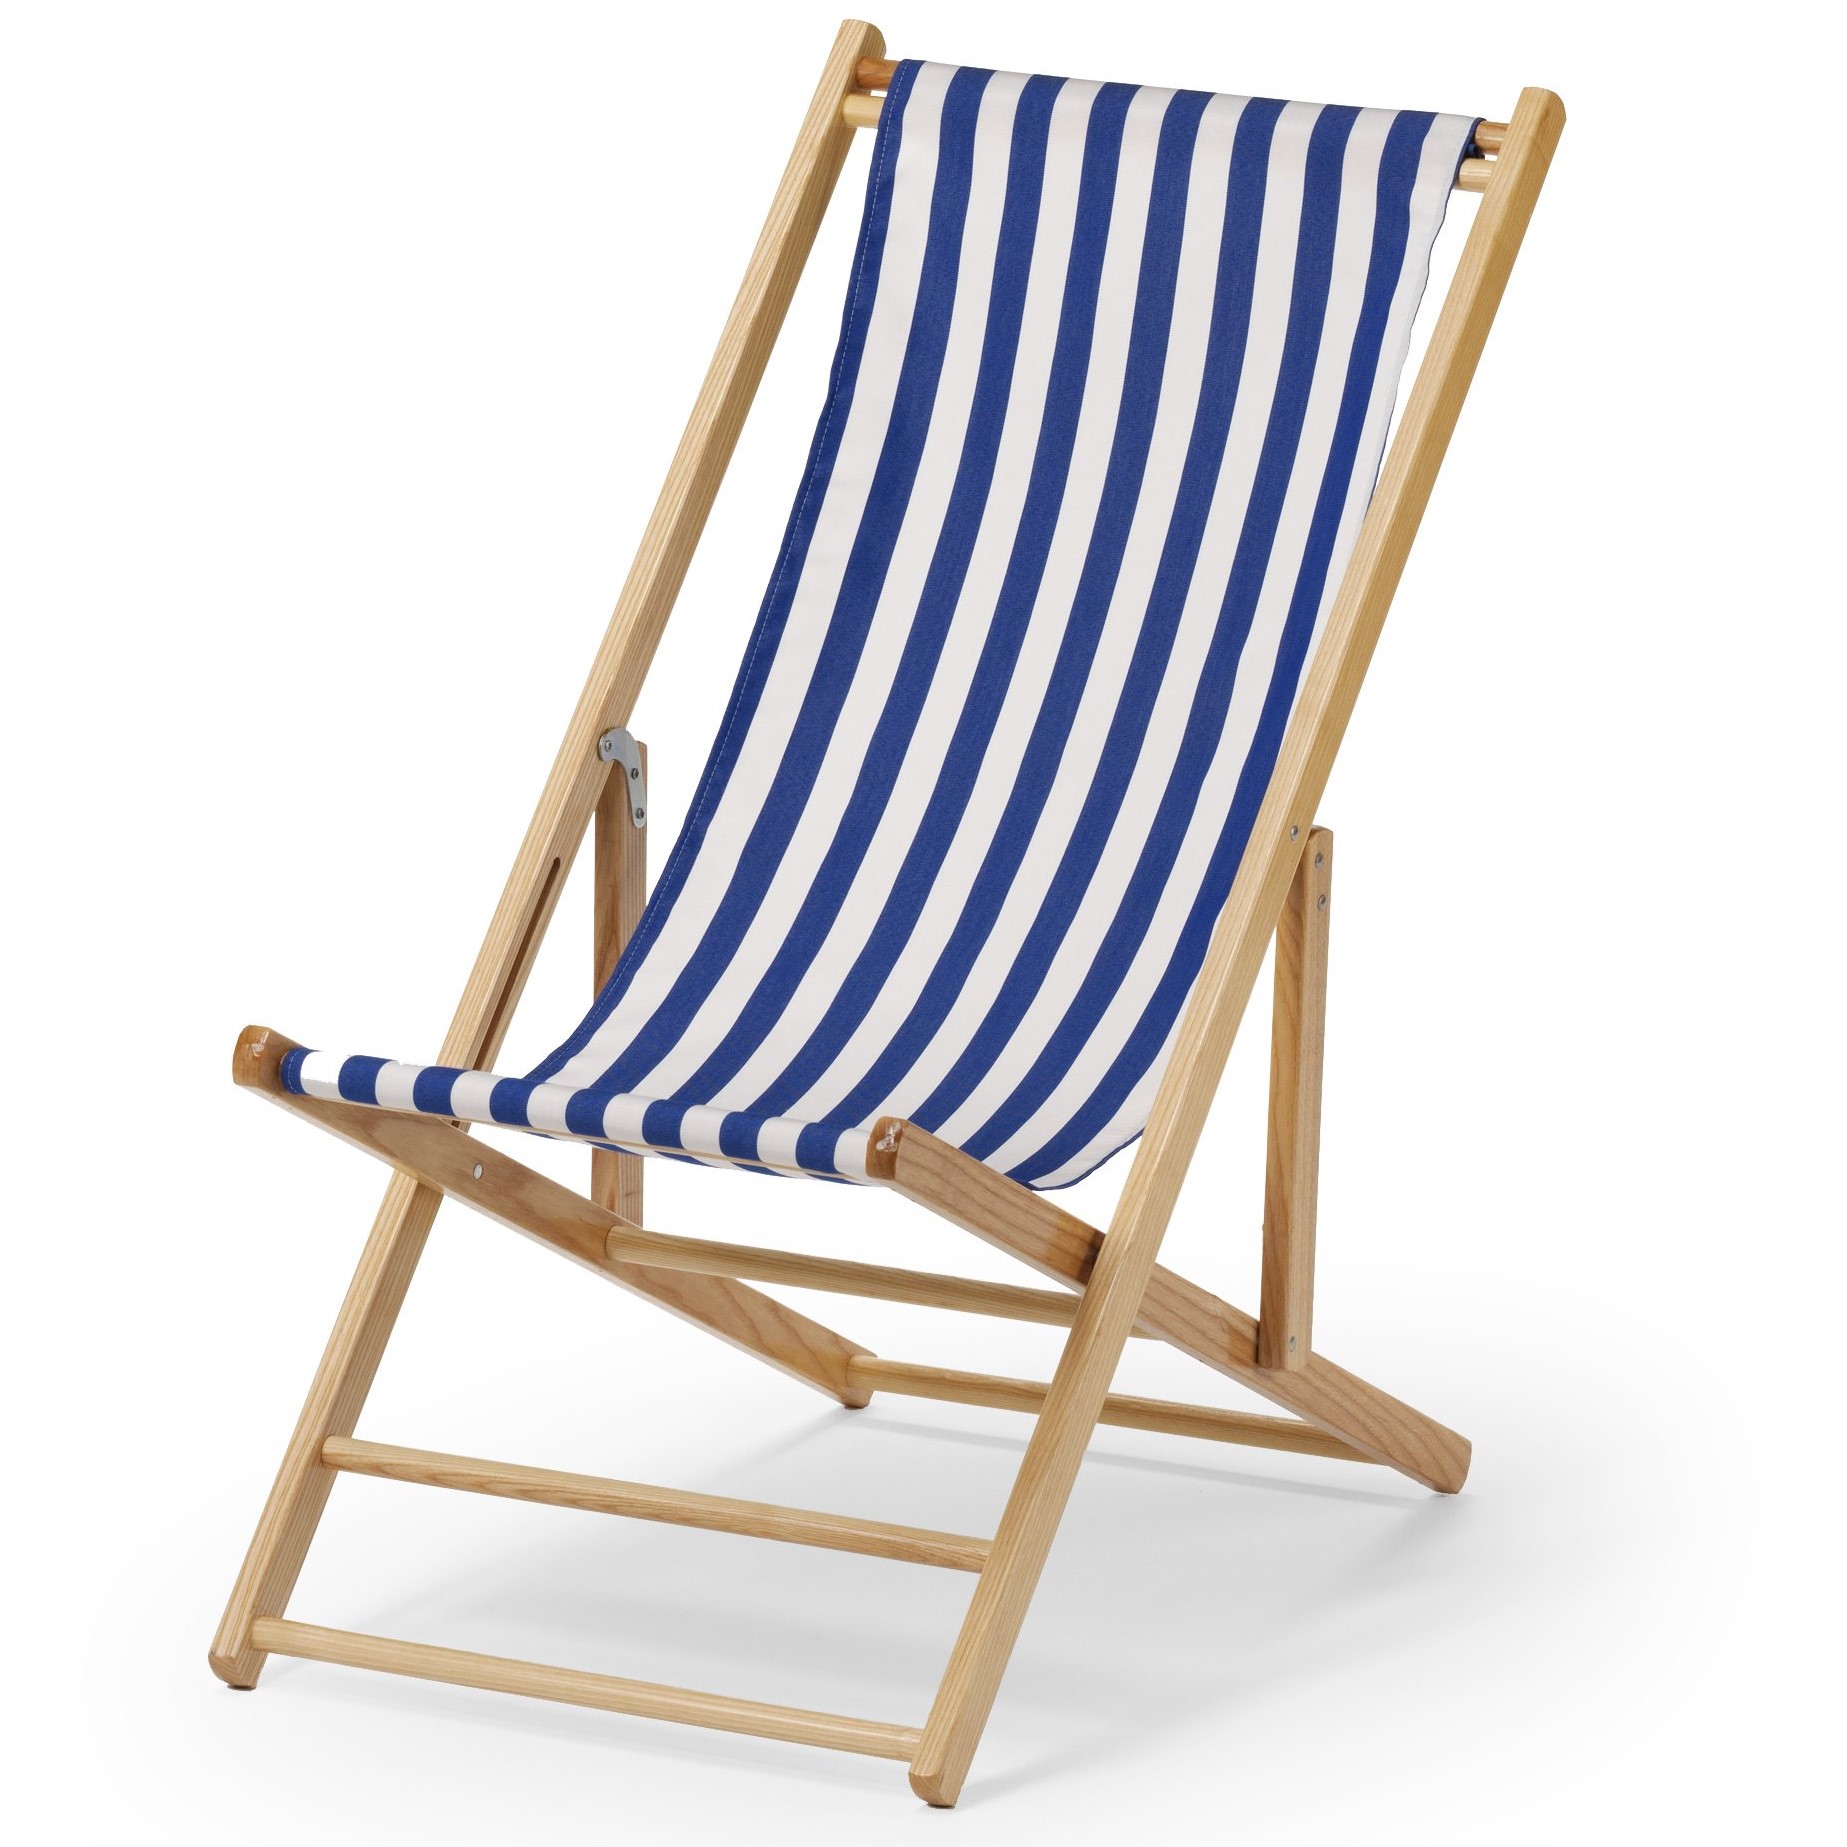 Deck Chair Hire | Traditional Seaside Deck Chairs For Hire | Dorset ...